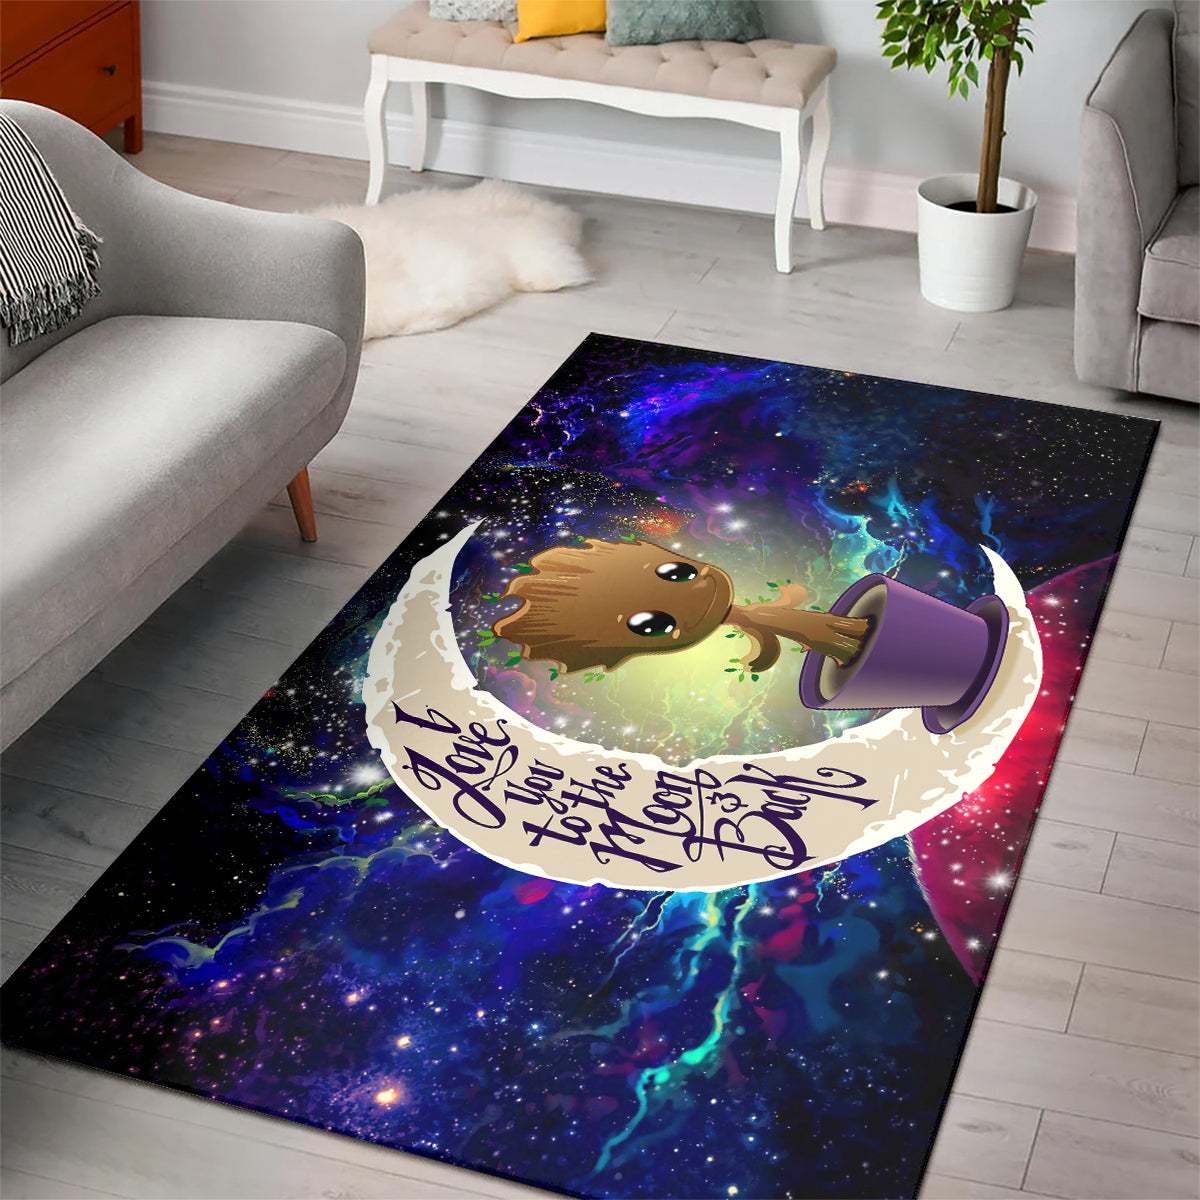 Baby Groot Love You To The Moon Galaxy Carpet Rug Home Room Decor